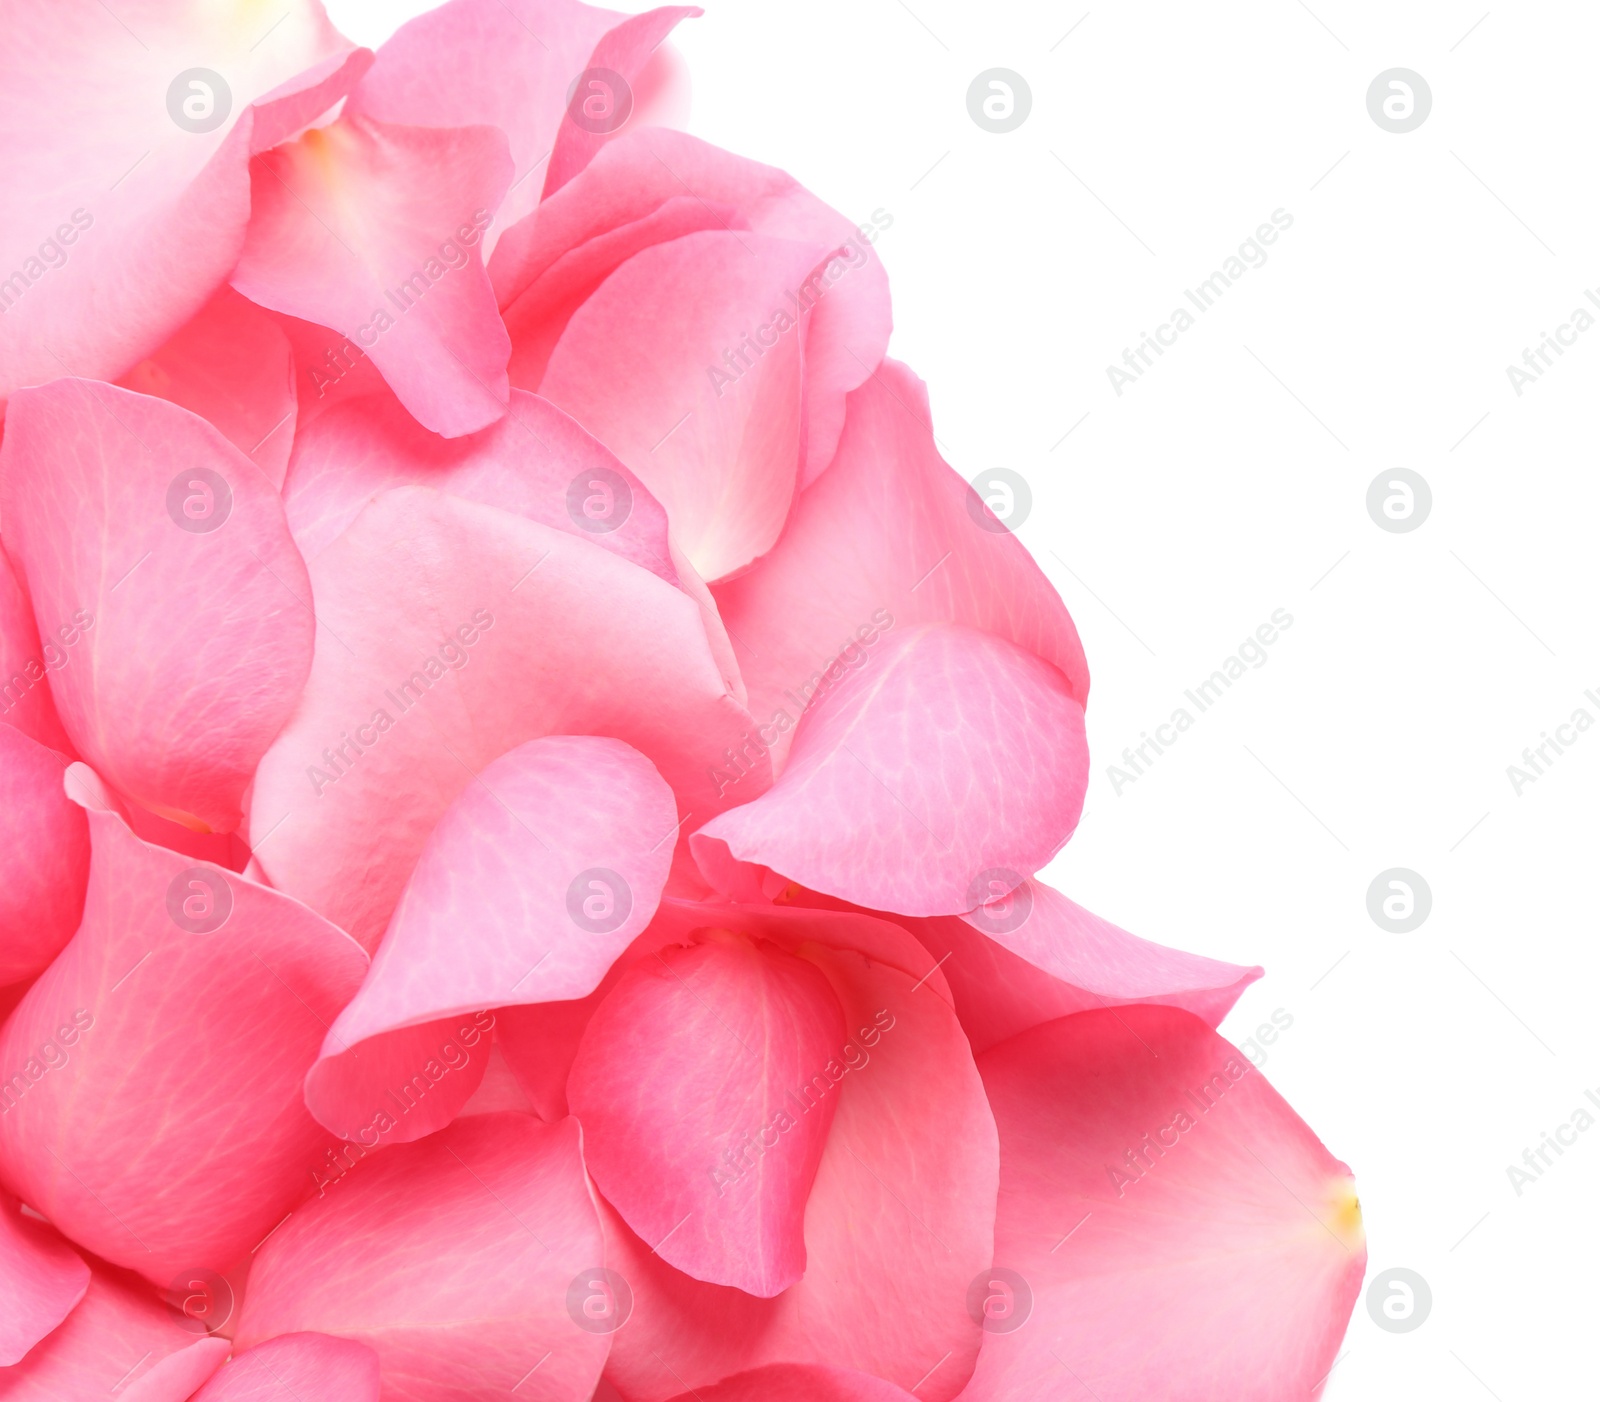 Photo of Pile of fresh pink rose petals on white background, top view